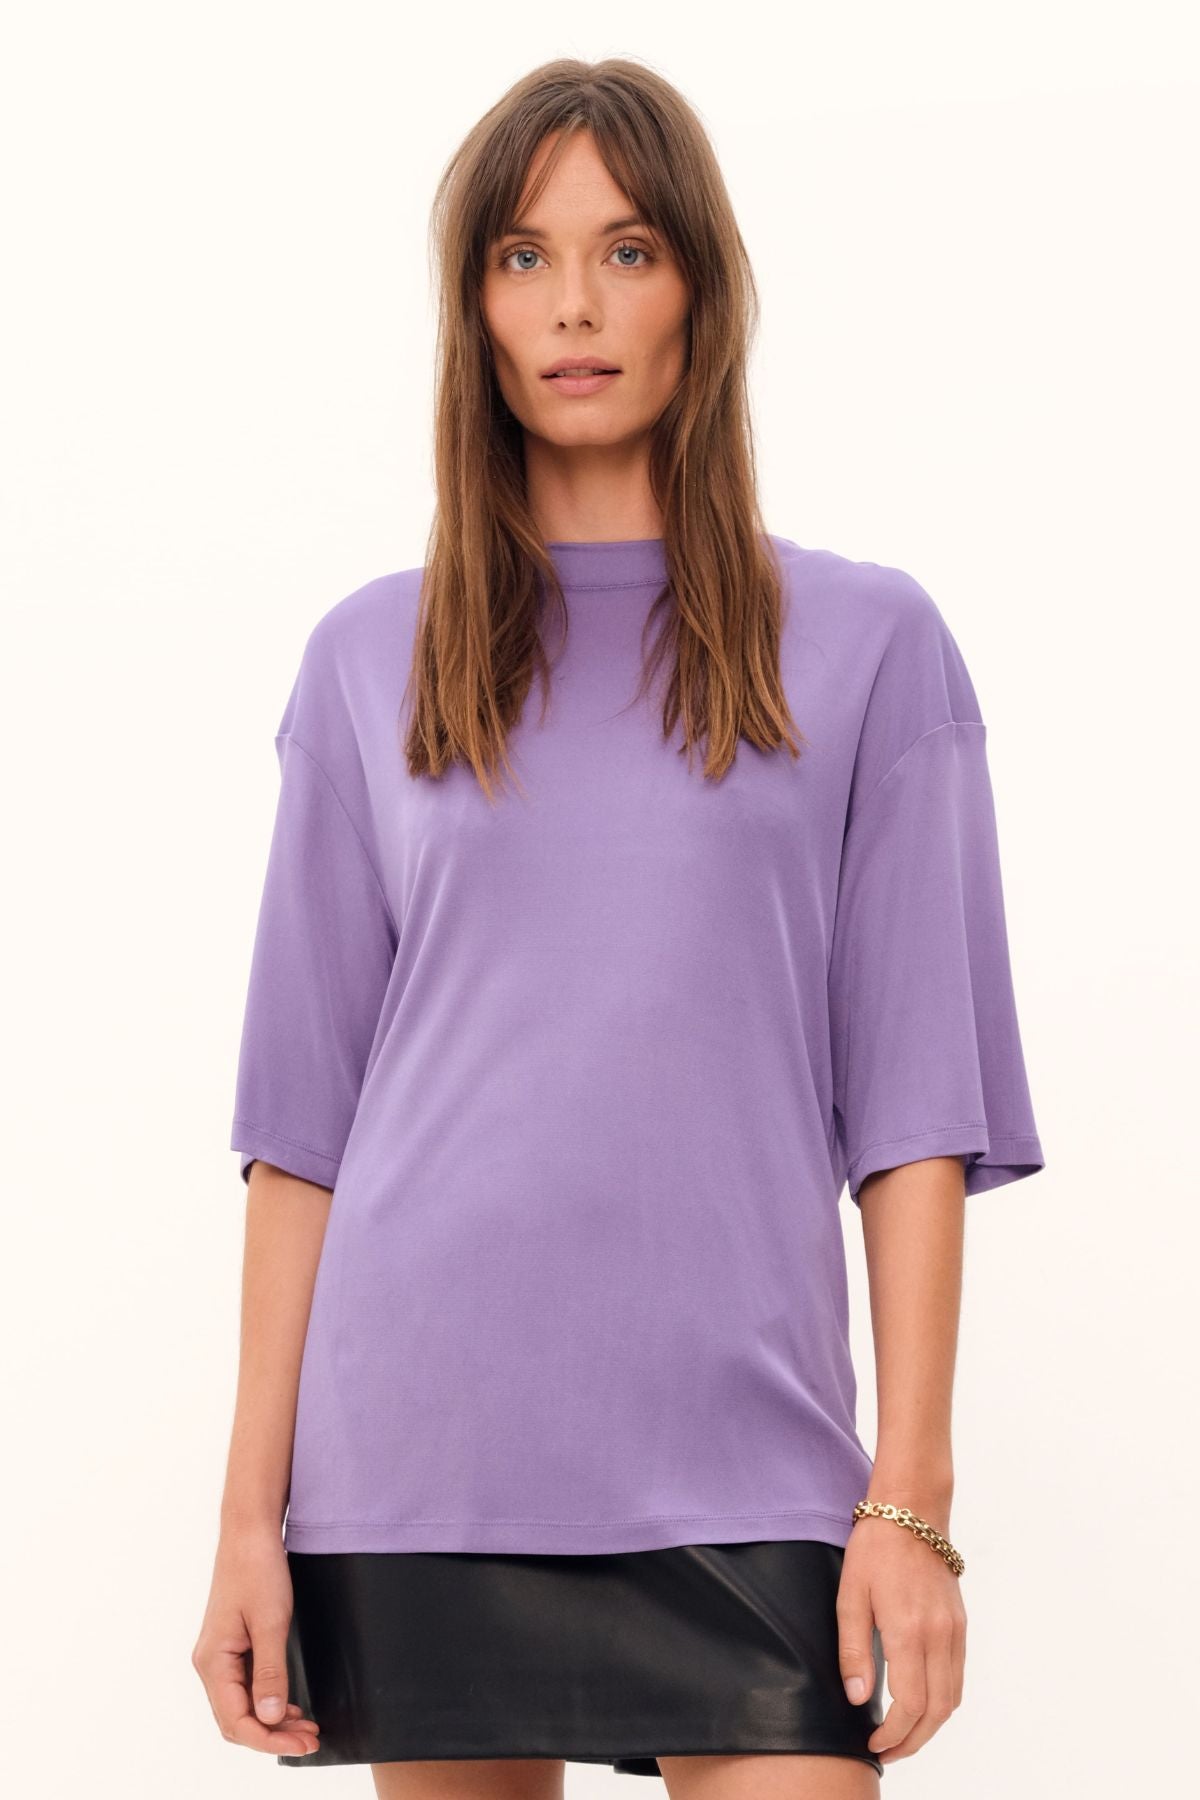 Exquisitely crafted from silk viscose jersey in a delicate lilac hue, the Aphrodite Top boasts a casual tee silhouette, a luxuriously silken knit fabric, and a sleek, high, round neckline.